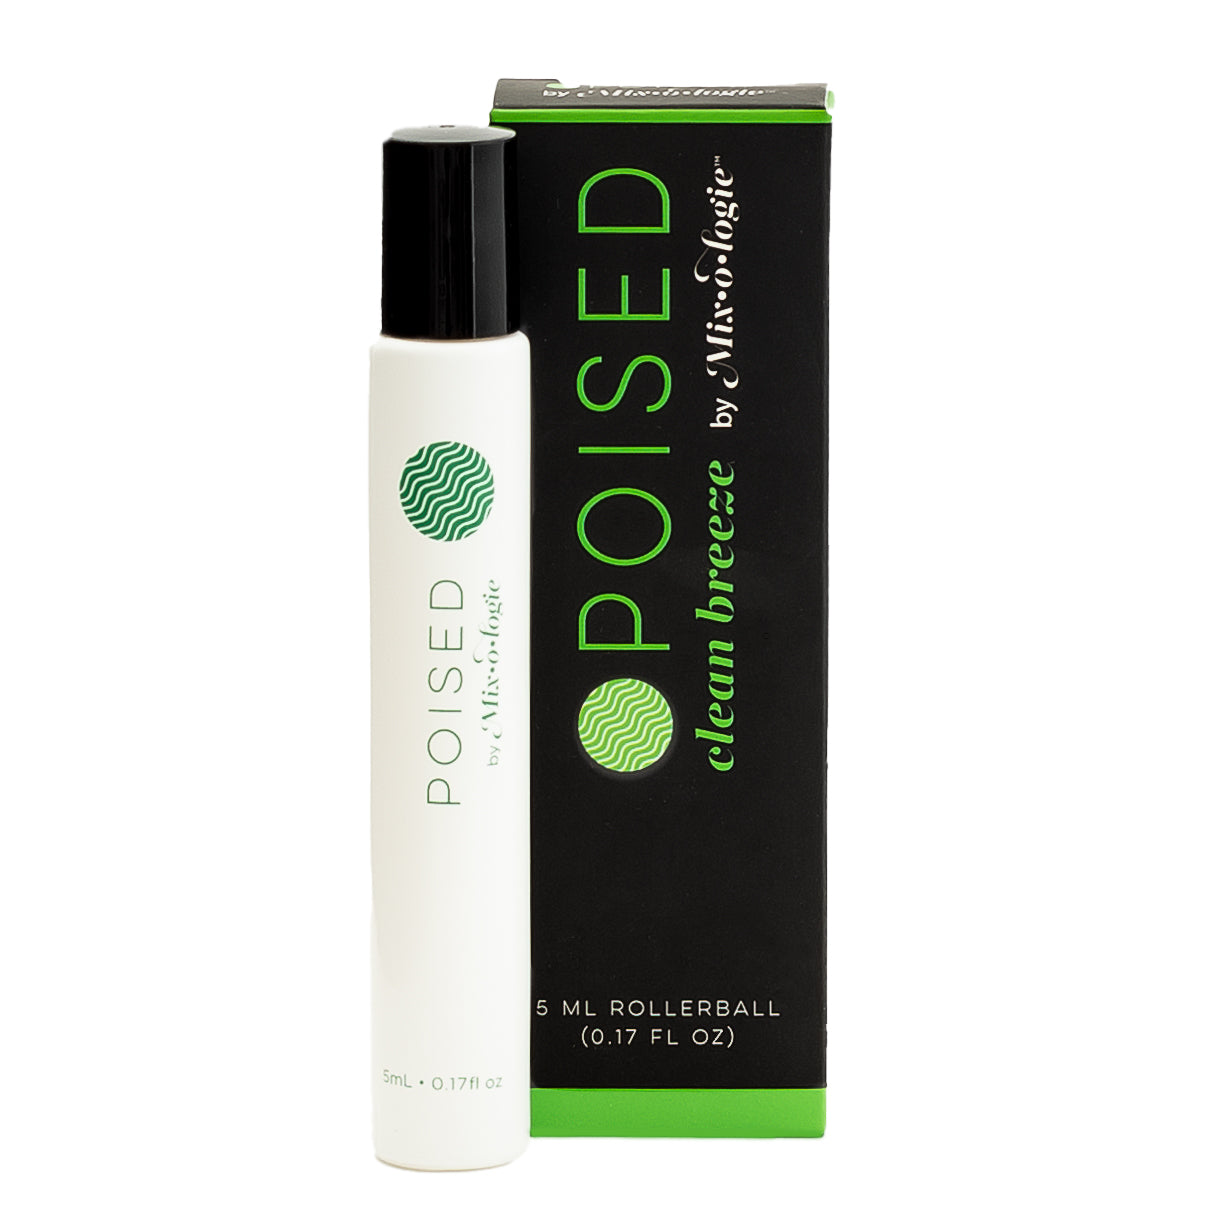 Poised (clean breeze) - Perfume Oil Rollerball (5 mL)